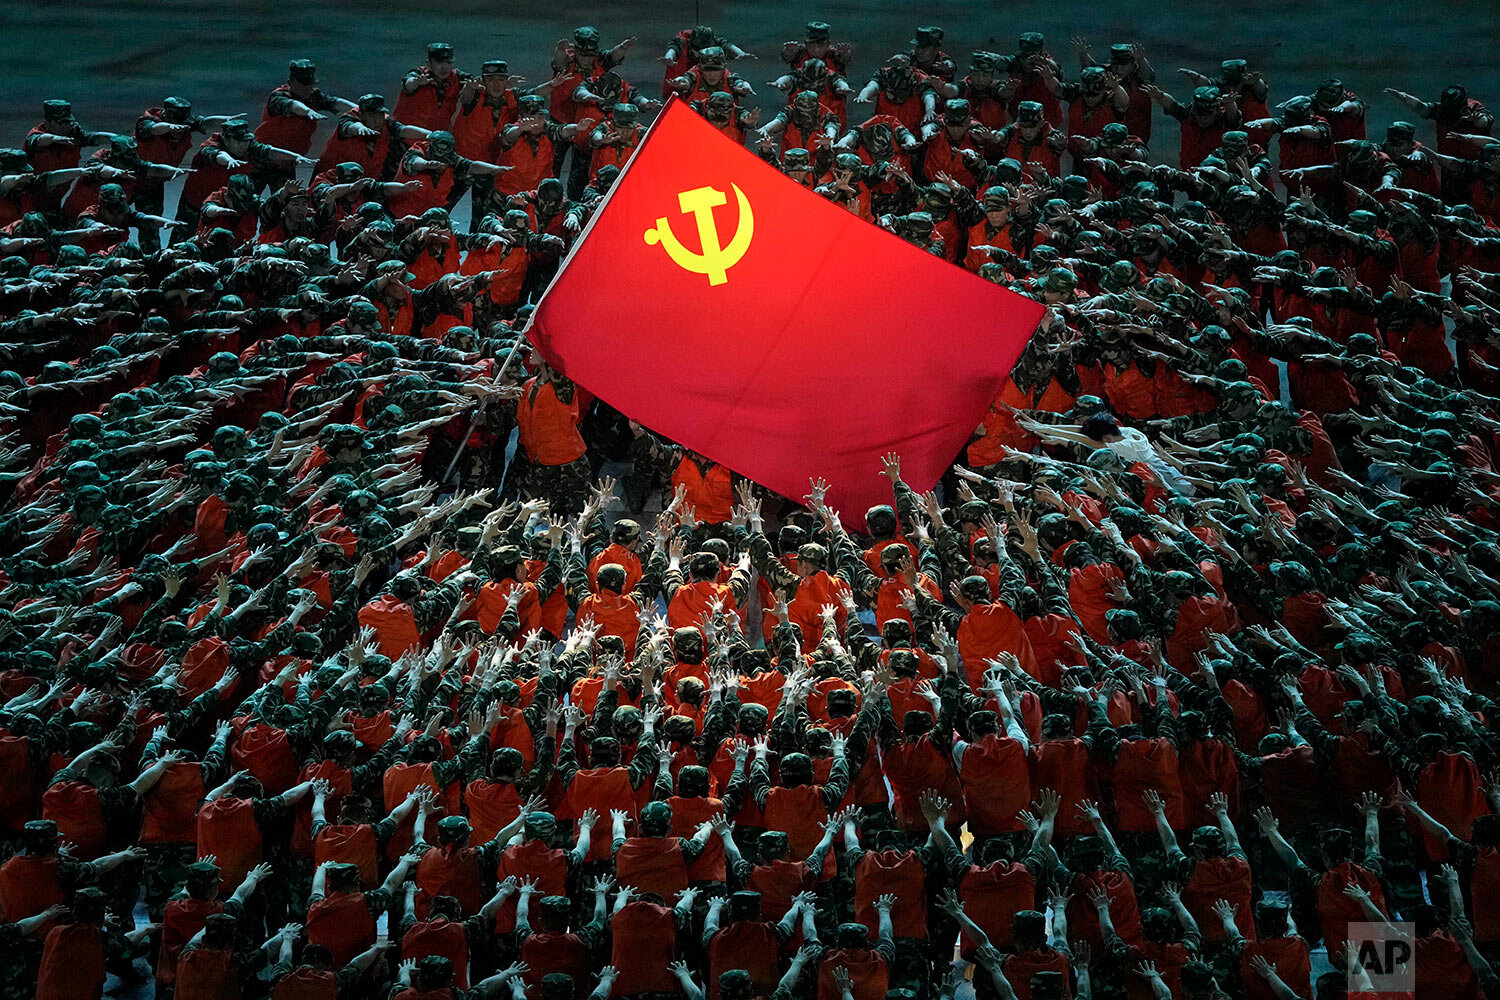  Performers dressed as rescue workers gather around the Communist Party flag during a gala show ahead of the 100th anniversary of the founding of the Chinese Communist Party in Beijing on Monday, June 28, 2021. (AP Photo/Ng Han Guan) 